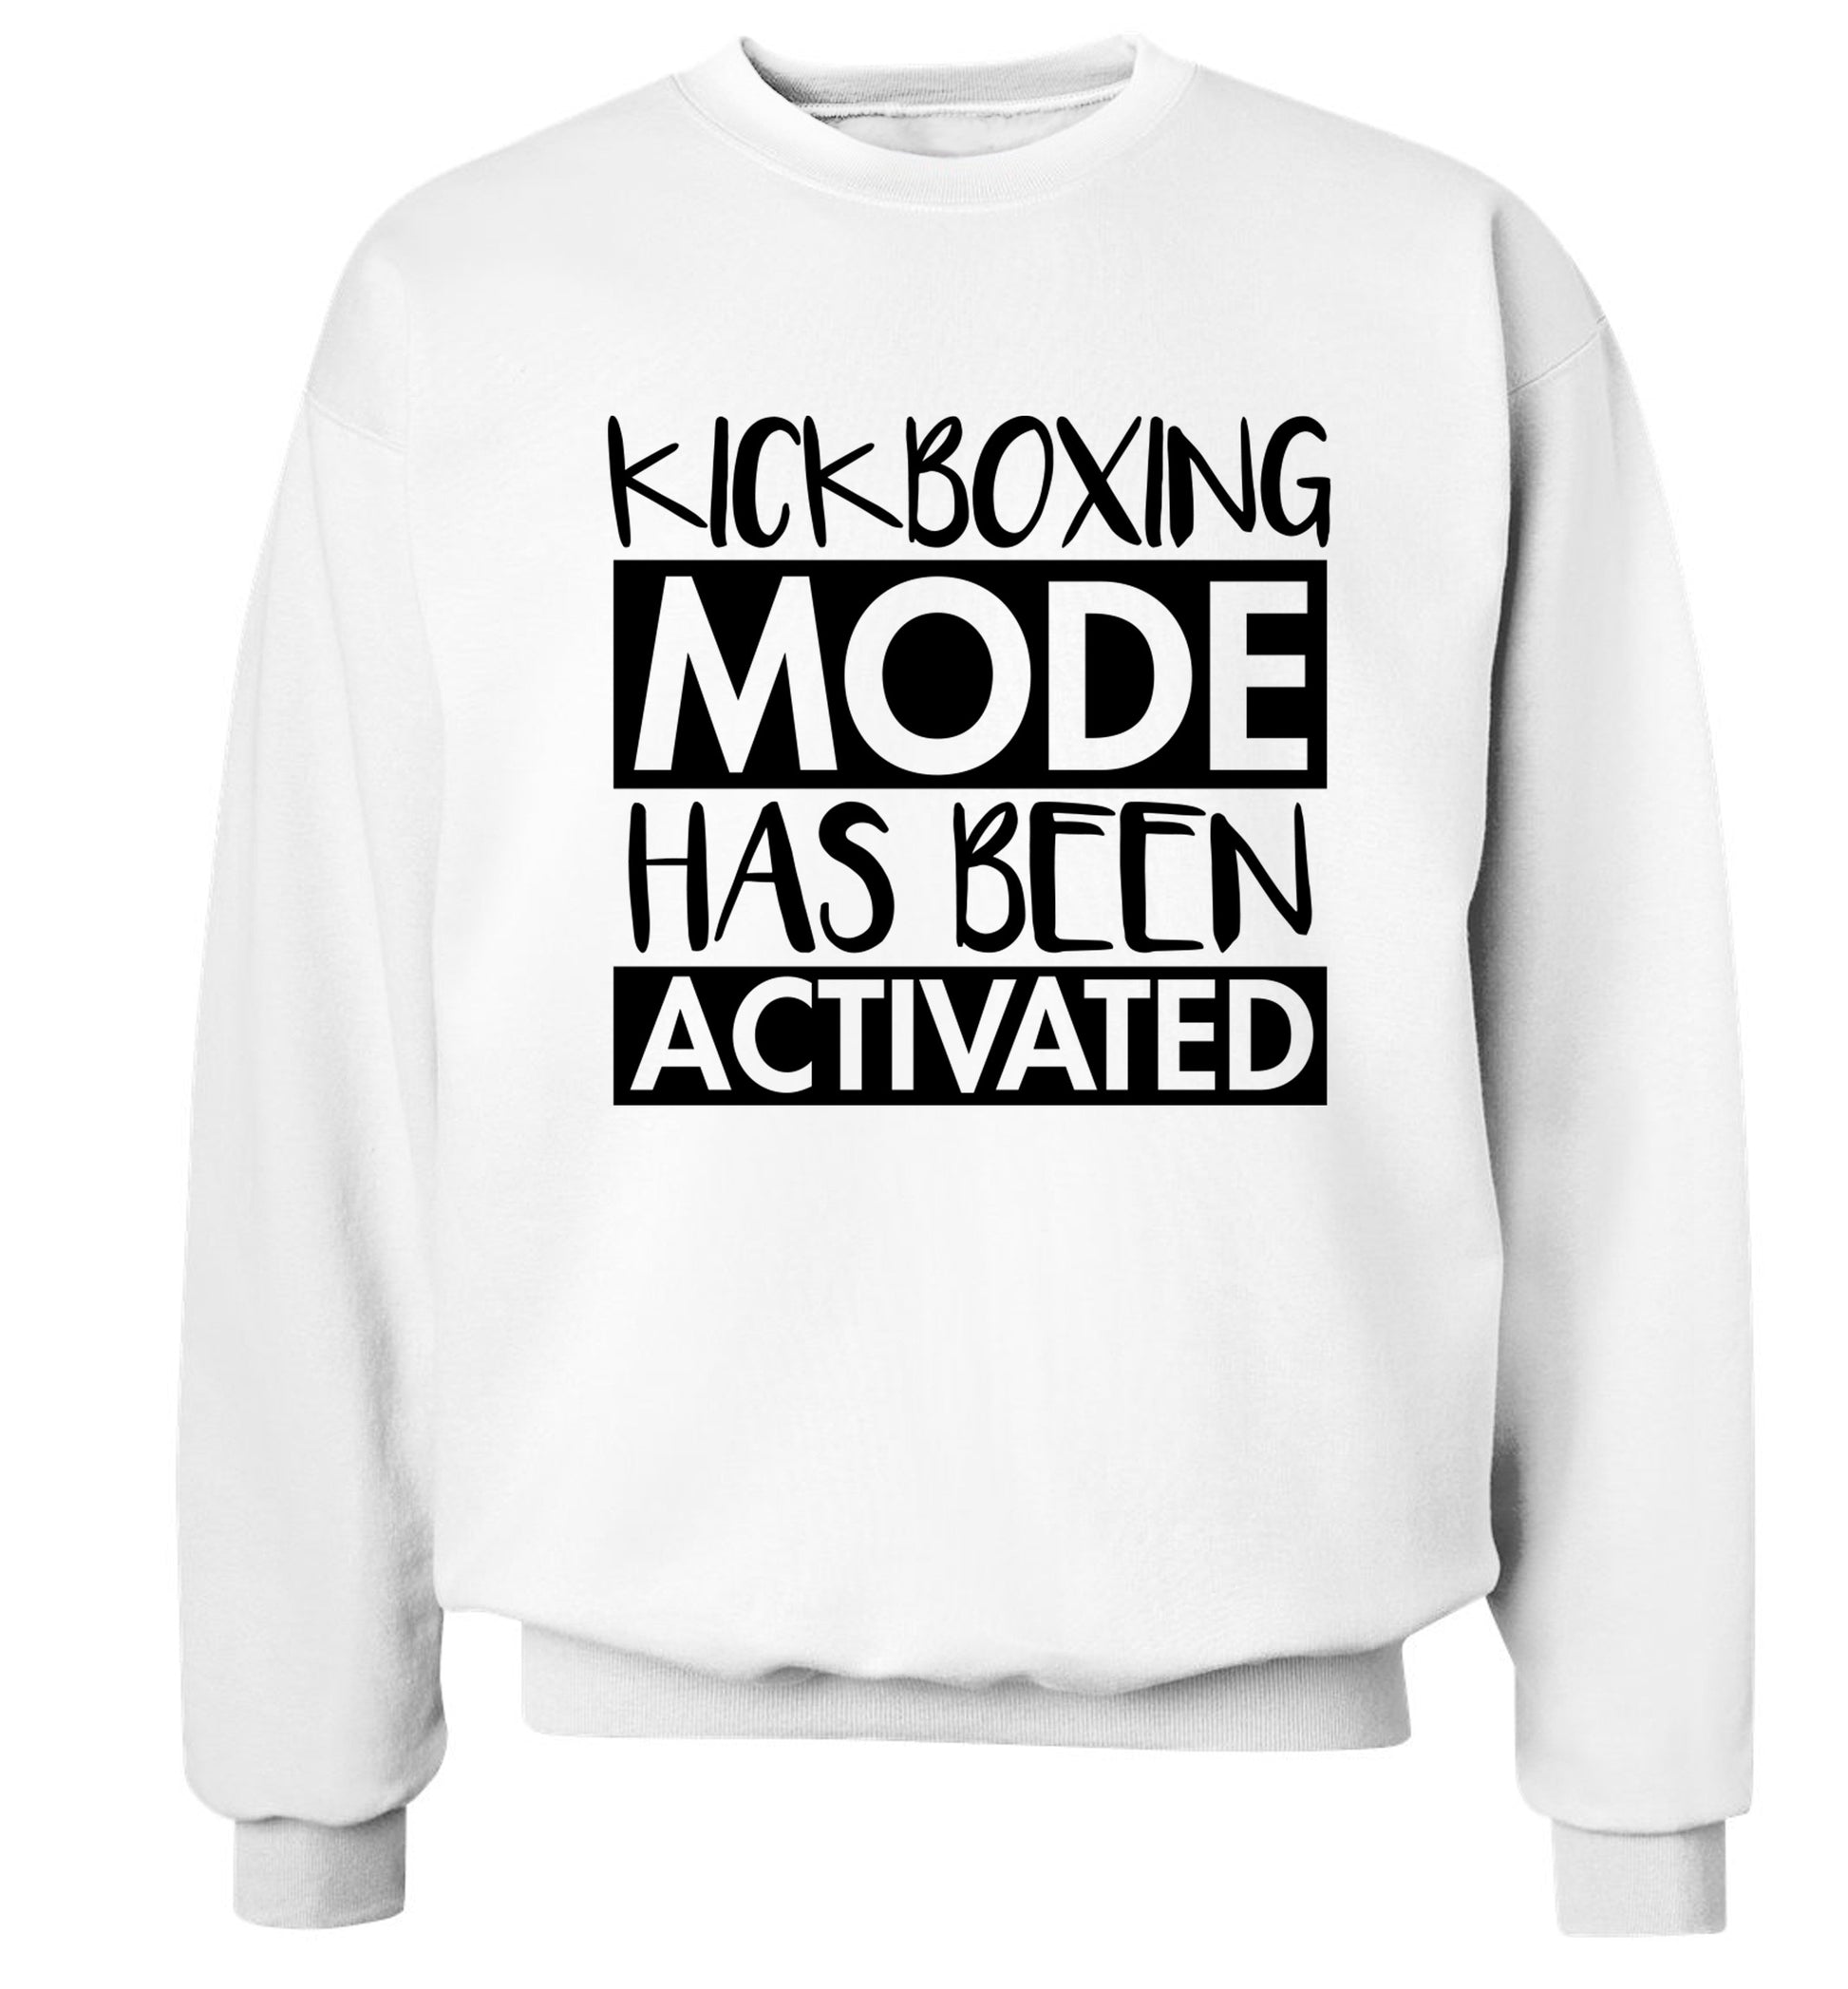 Kickboxing mode activated Adult's unisex white Sweater 2XL